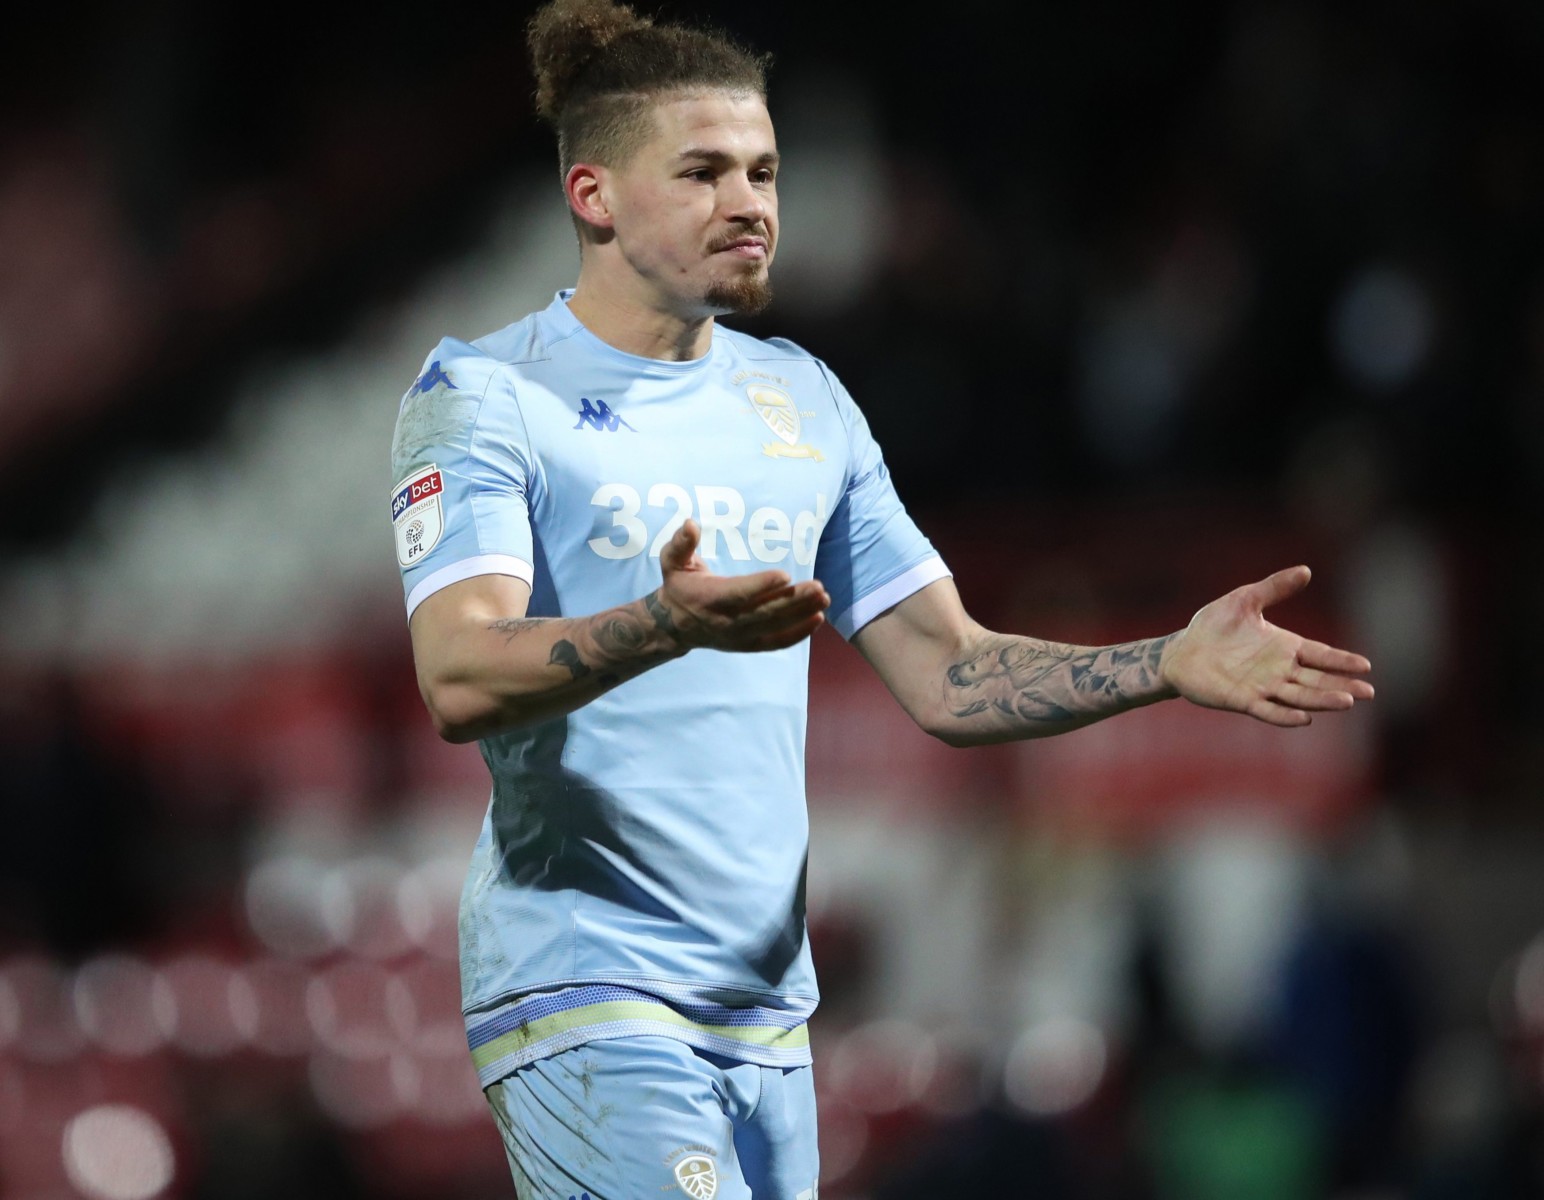 , Sheffield United line up 20m transfer move for Leeds midfielder Kalvin Phillips if they qualify for Europe